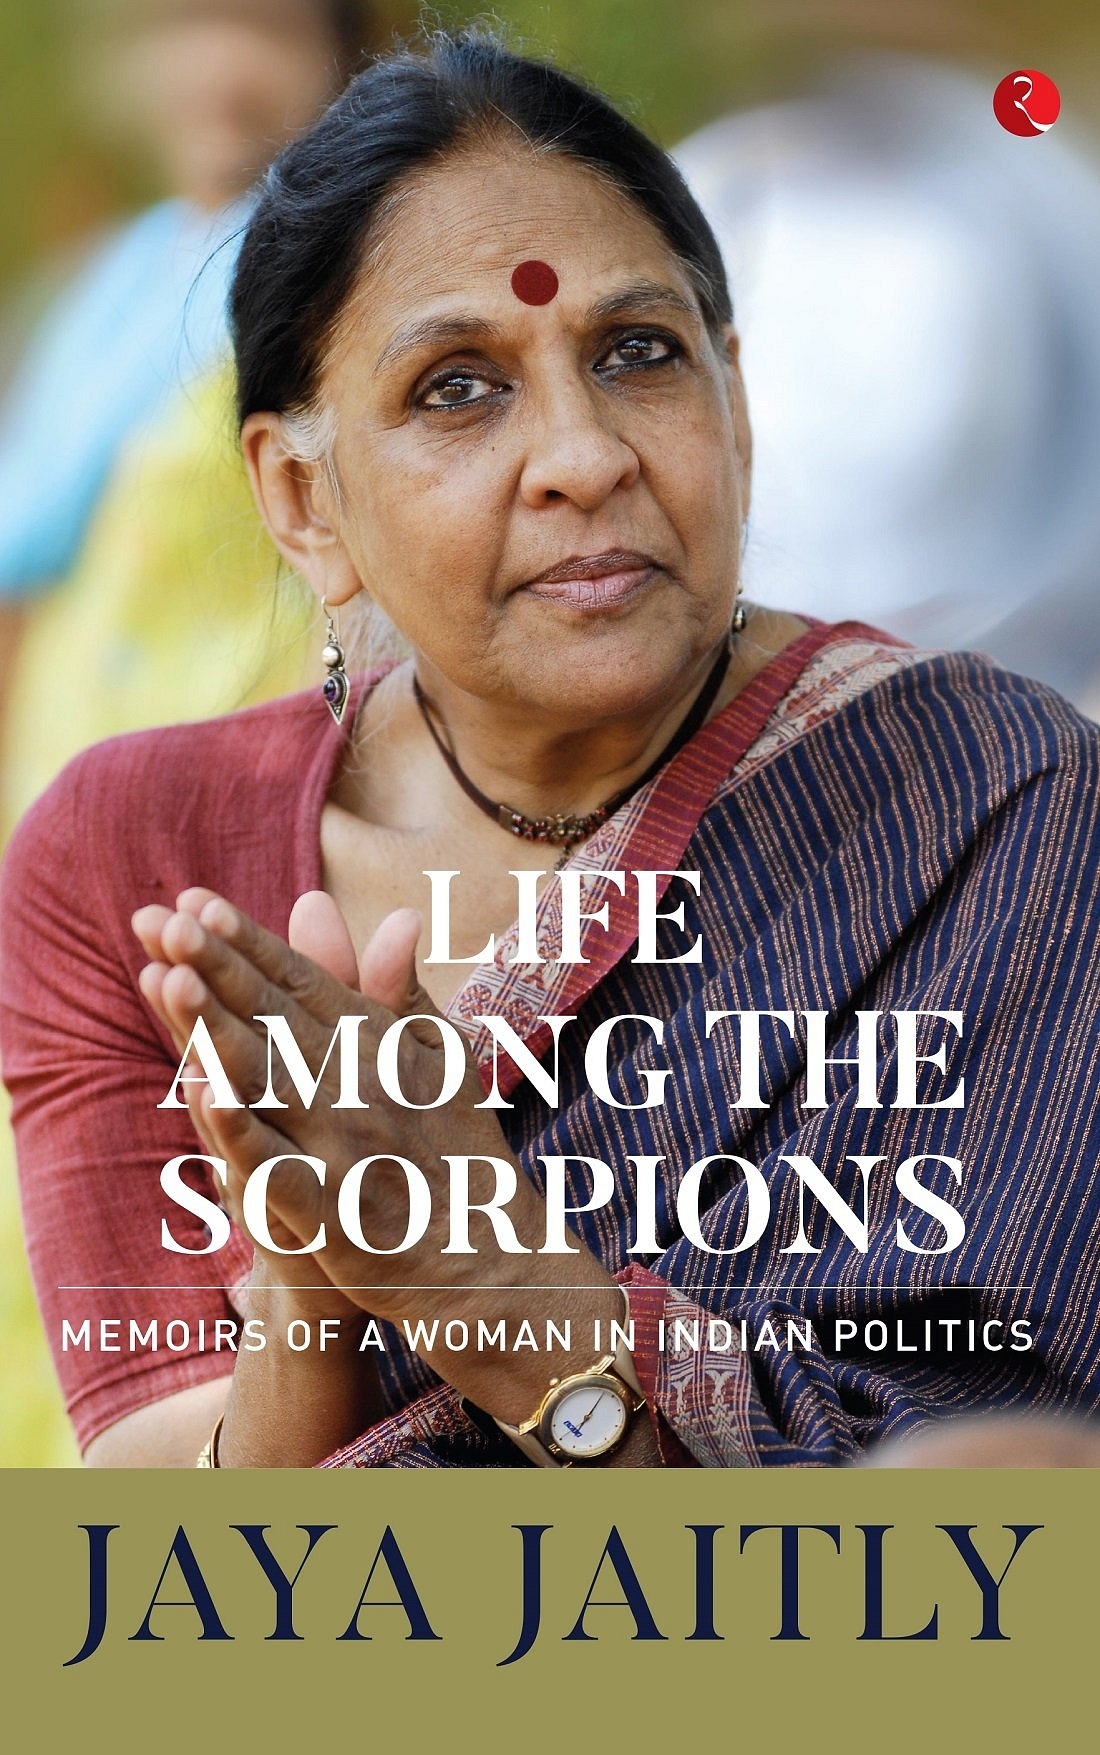 Life Among the Scorpions: Memoirs of a Woman in Indian Politics by Jaya Jaitly, Rupa Publications